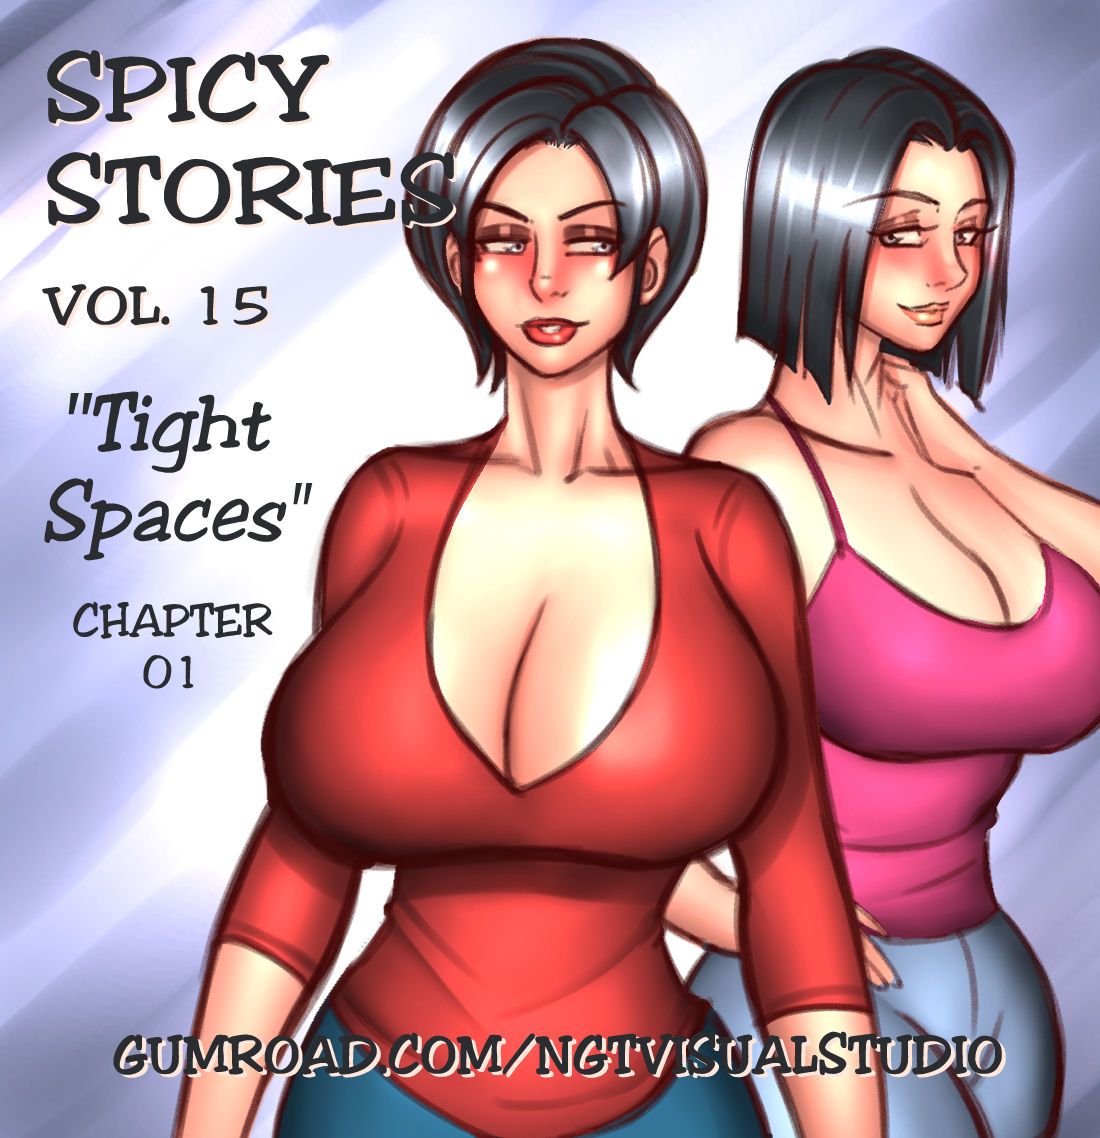 NGT Spicy Stories 15 - Tight Spaces (Ongoing) NGT Spicy Stories 15 - Tight Spaces (Ongoing) 23